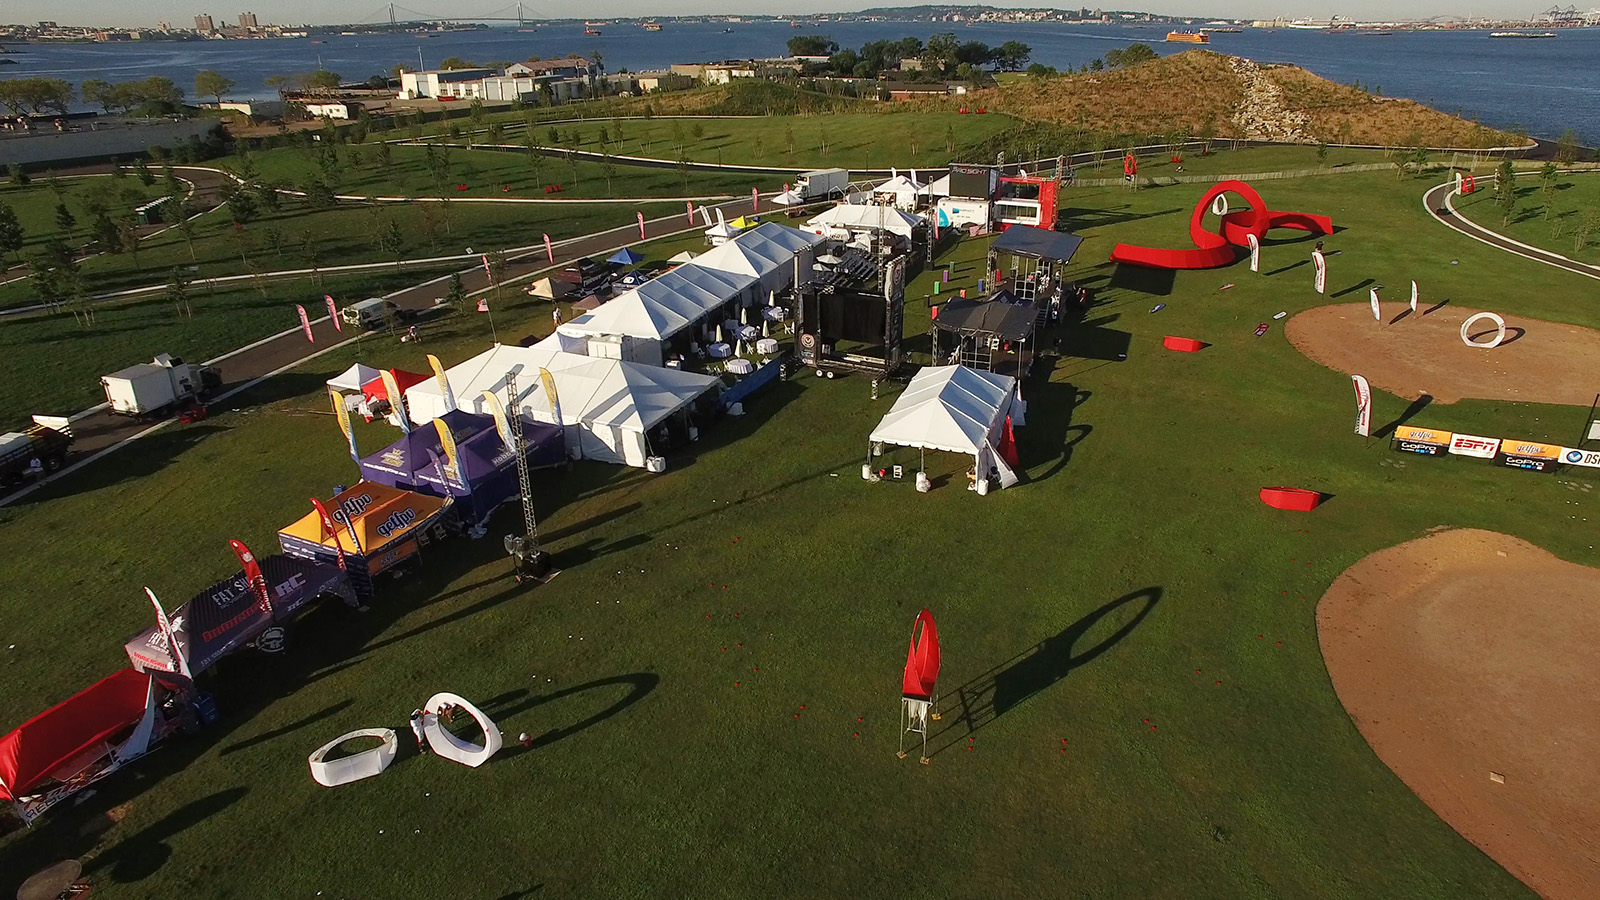 The race track is prepared for action Aug. 7, the final day of the U.S. National Drone Racing Championships on Governors Island, New York. Jim Moore photo.